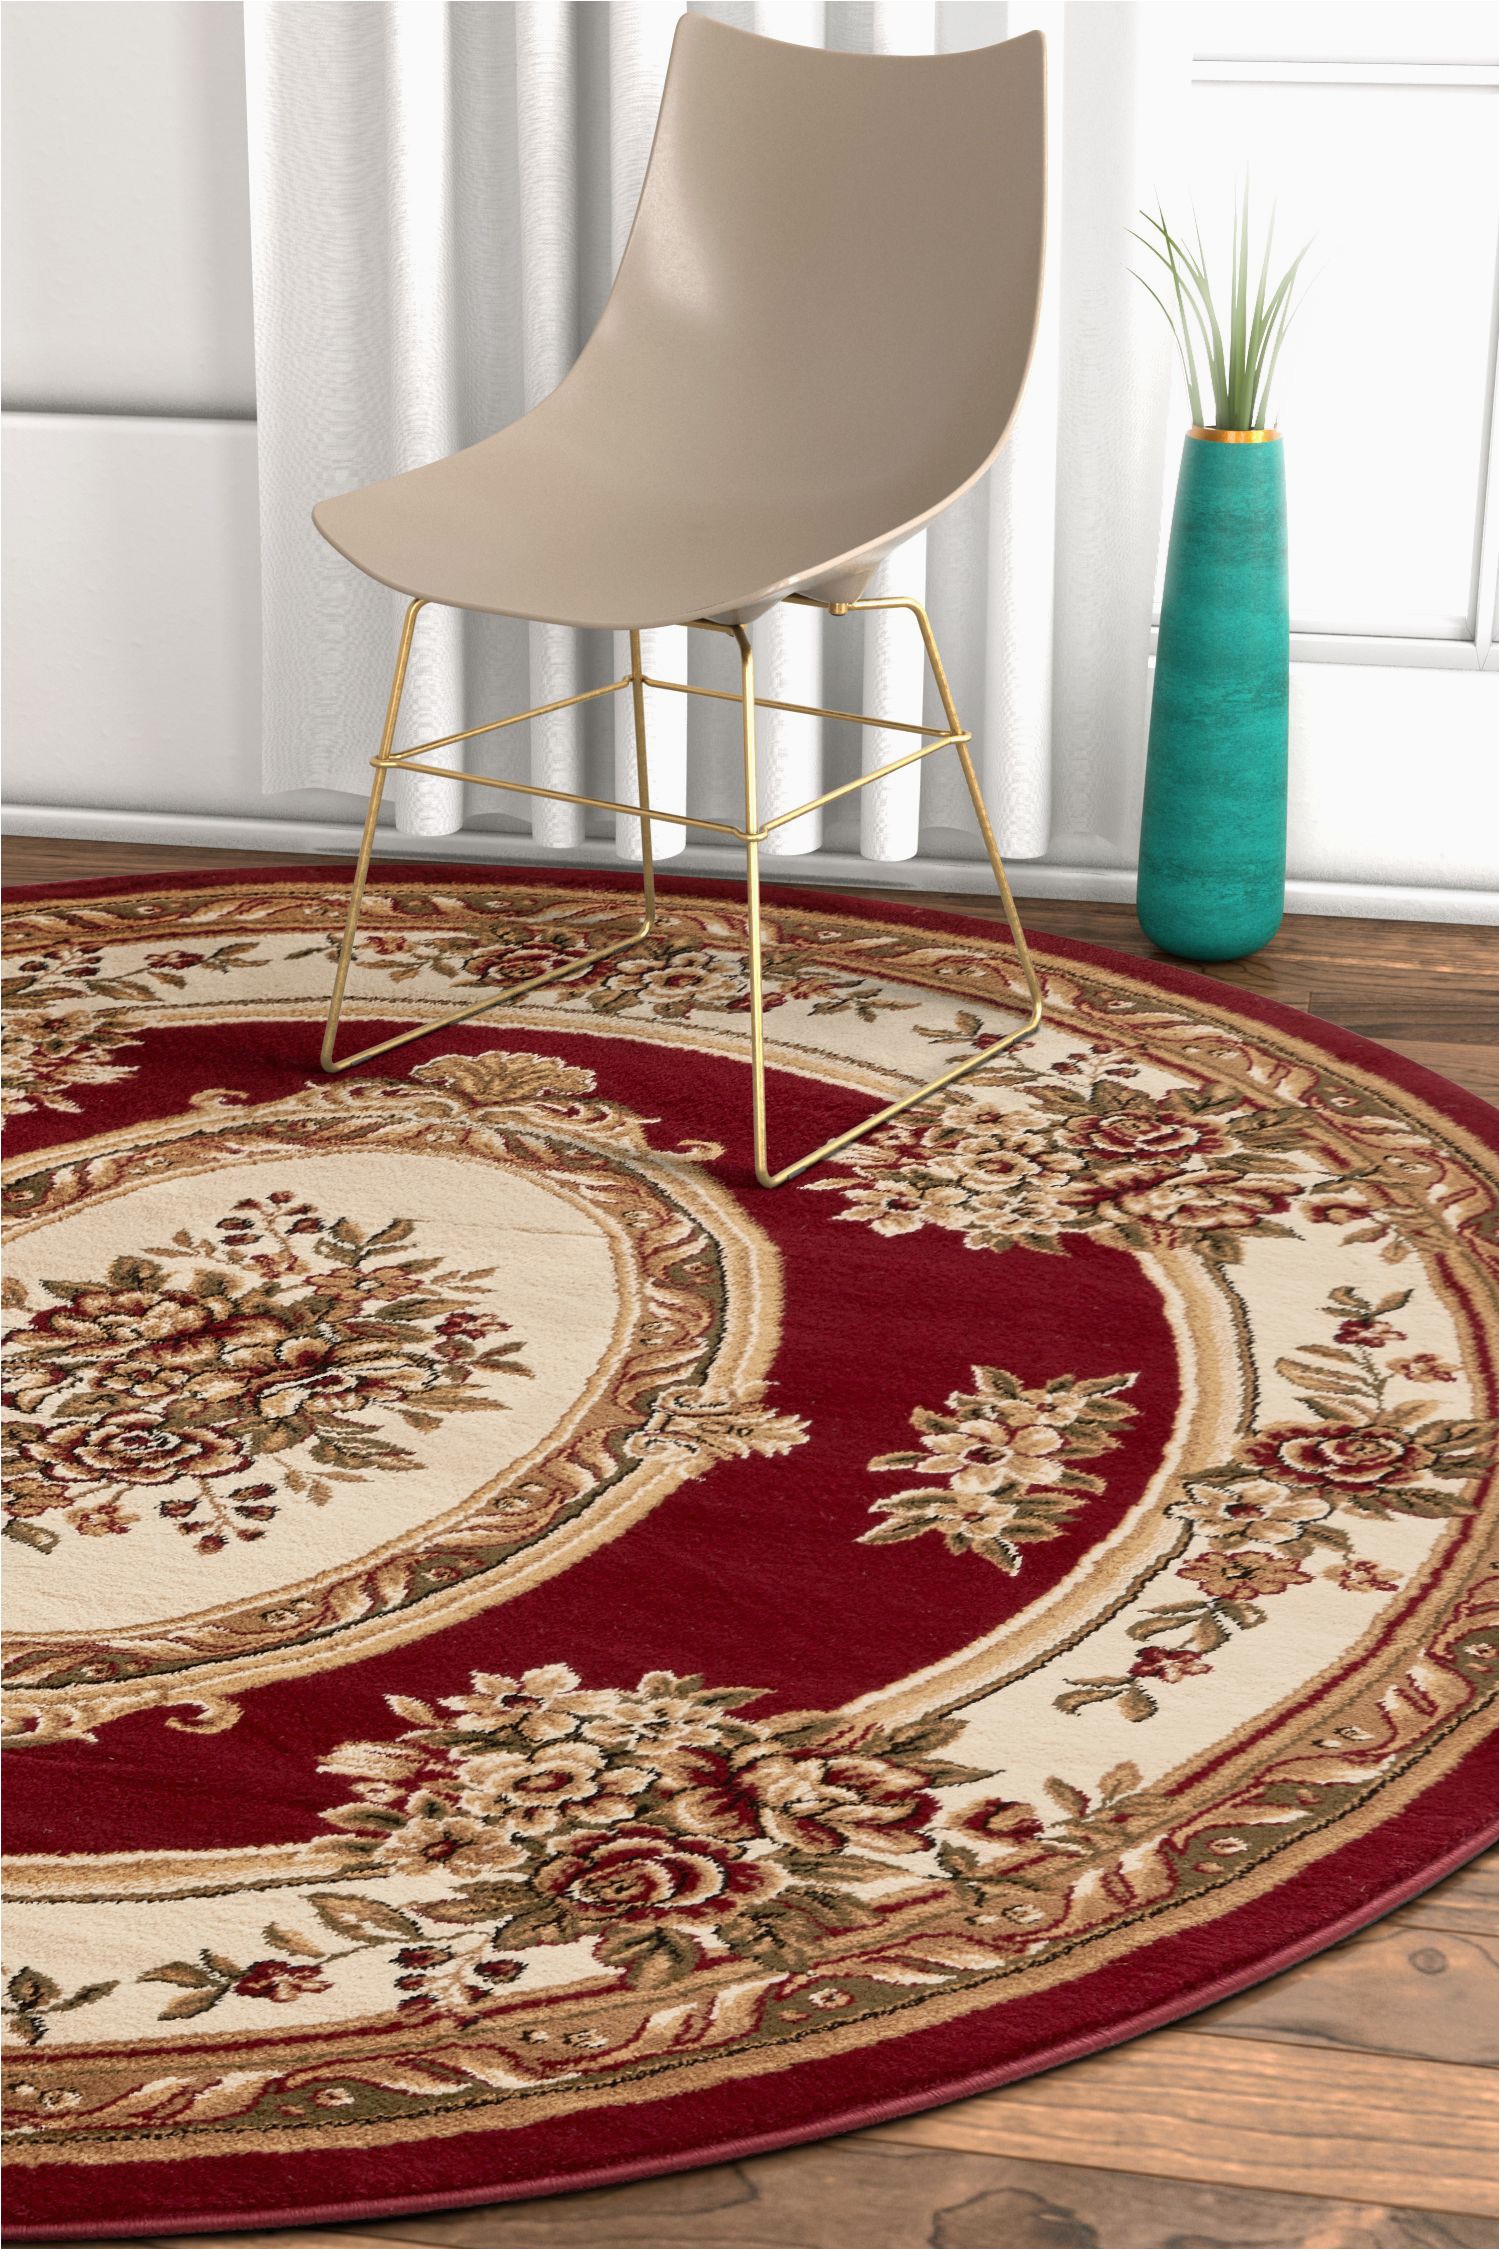 Home Depot area Rugs 8 by 10 Well Woven Timeless Le Petit Palais Traditional Medallion